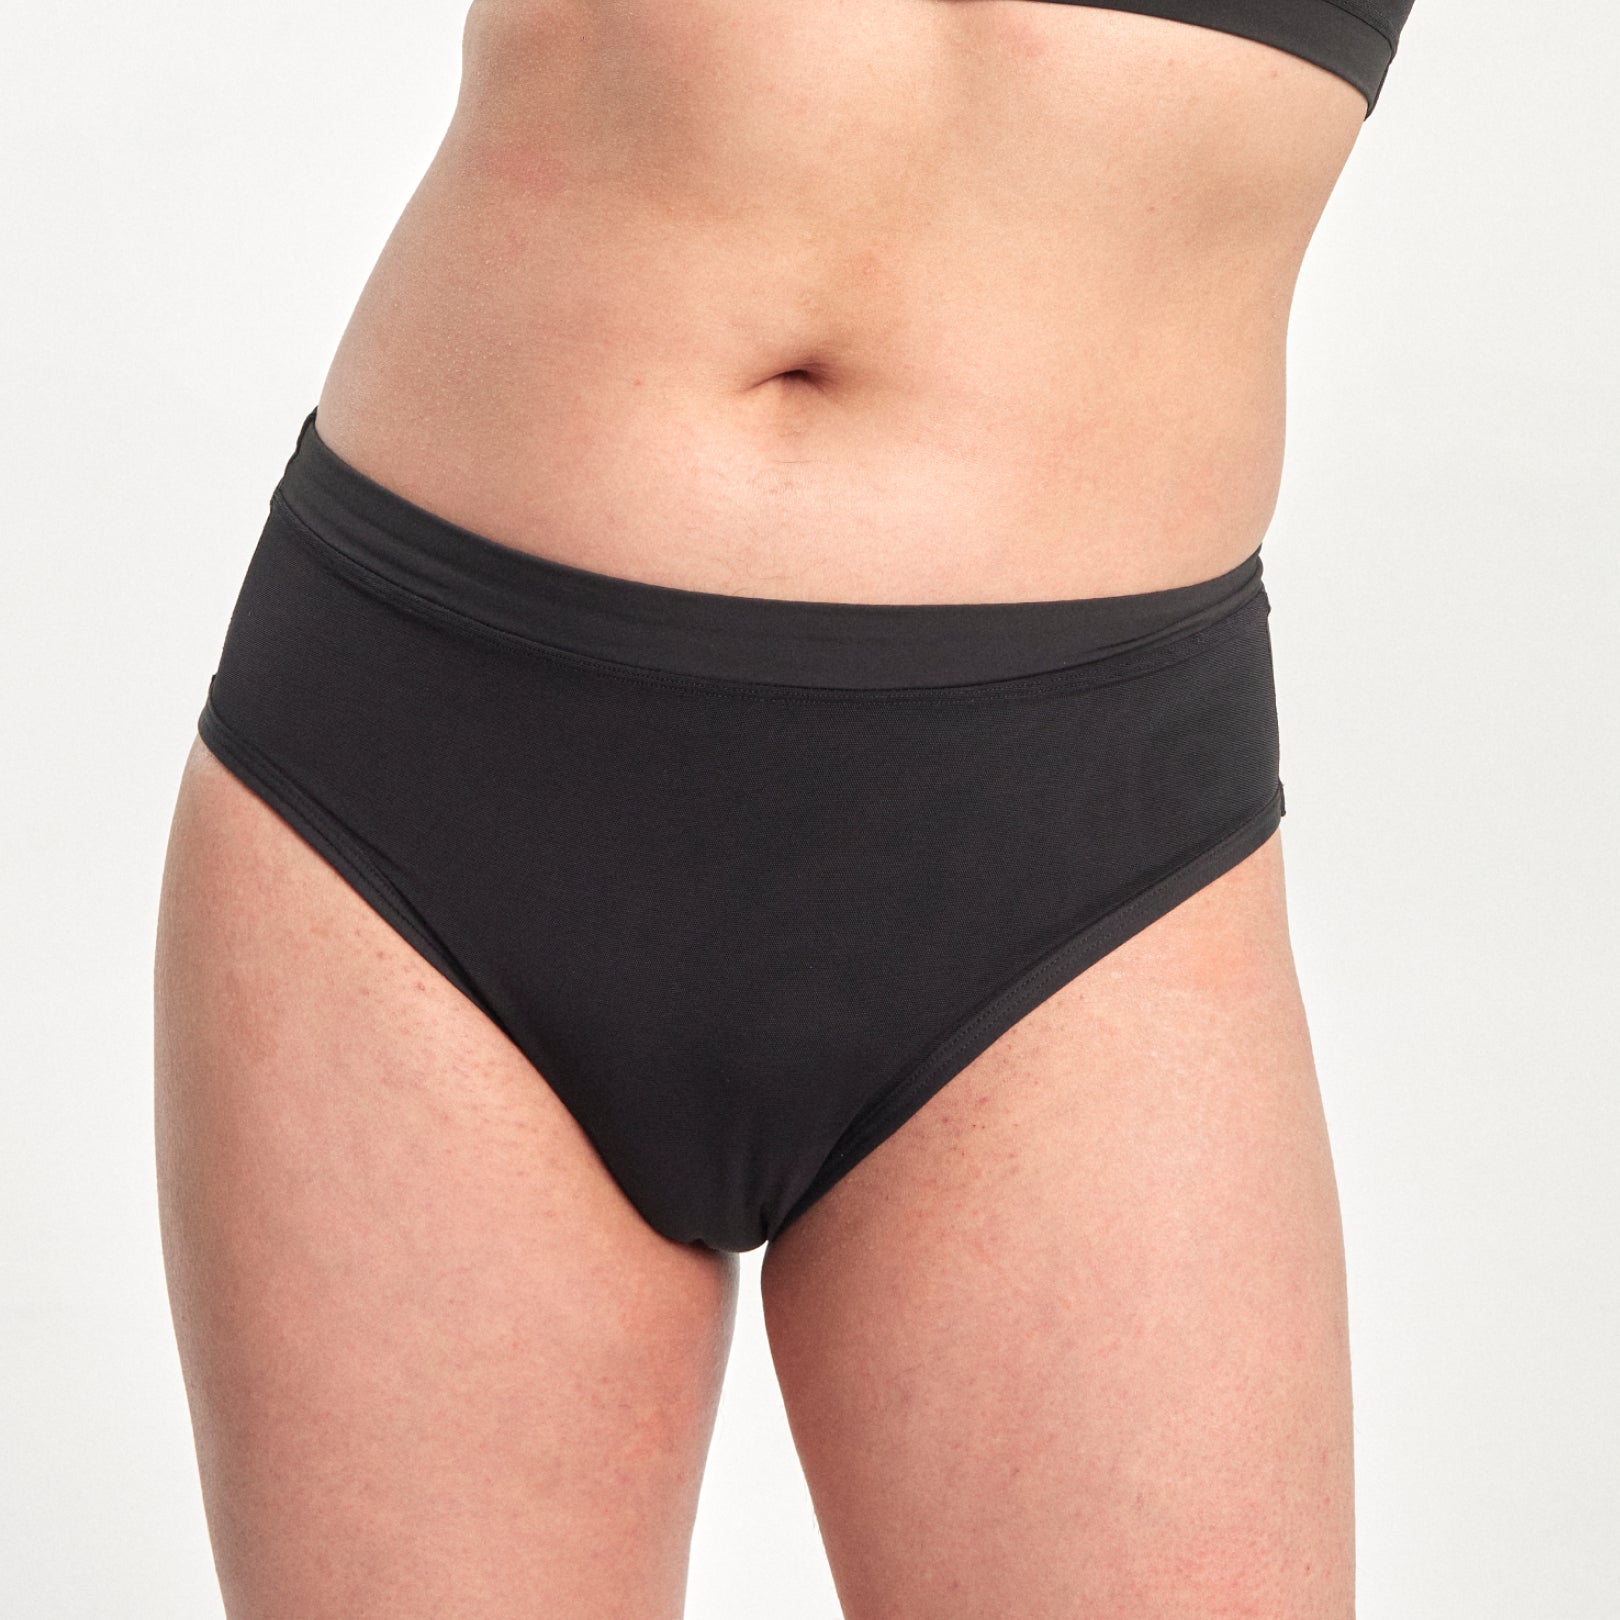 Comfort Smooth Tucking Thong from En Femme